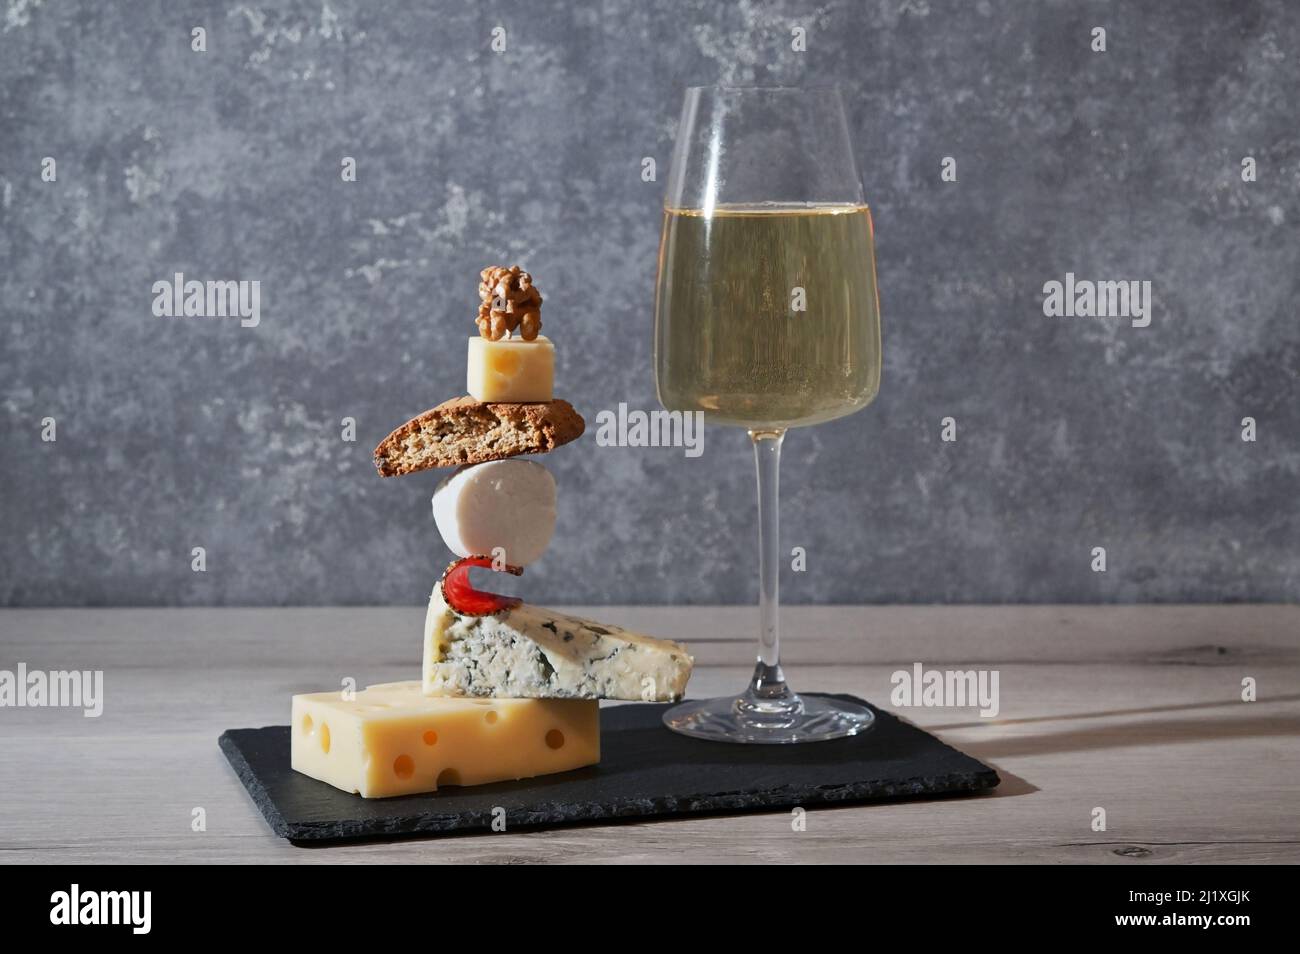 Concept Equilibrium Floating Food and White Wine Glass Stock Photo